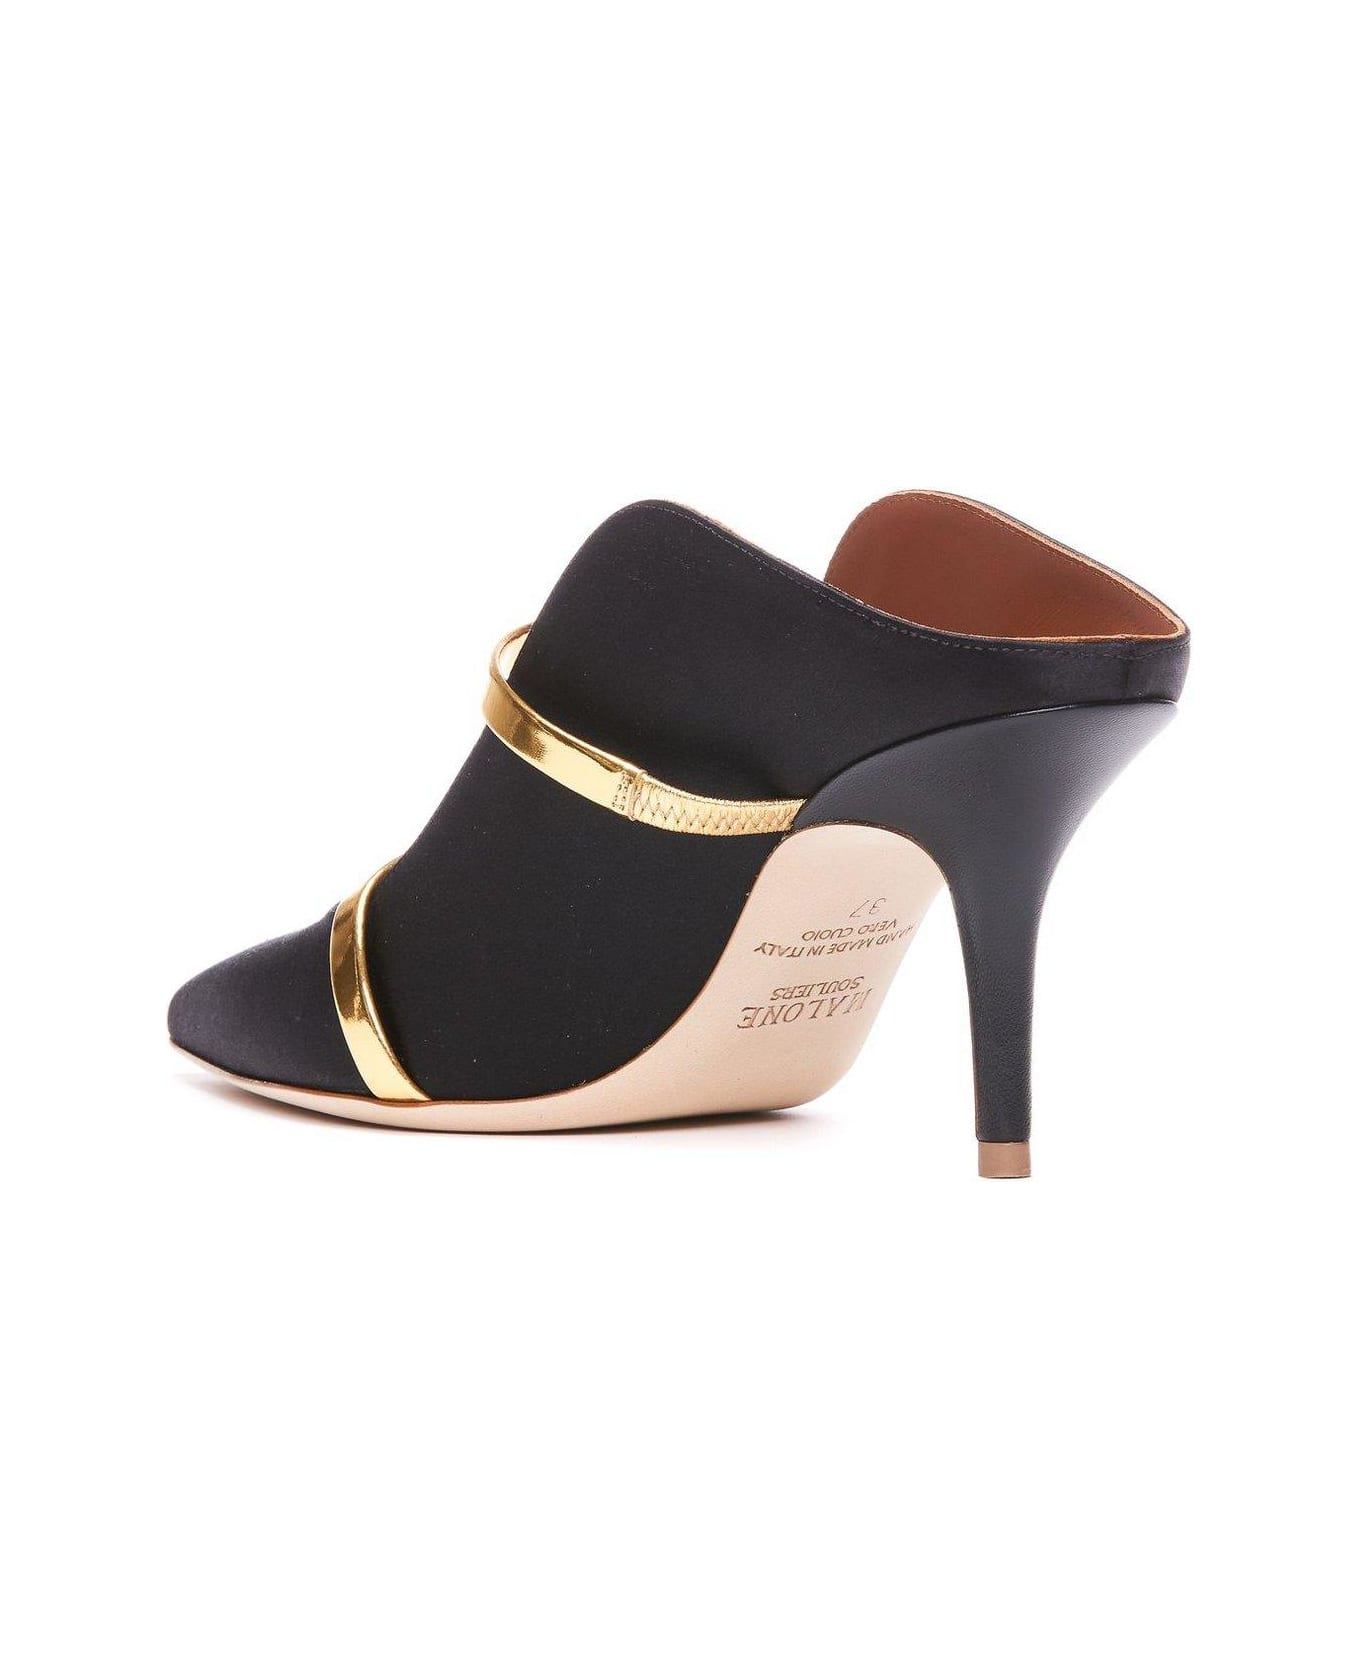 Malone Souliers Maureen Pointed-toe Mules - Black